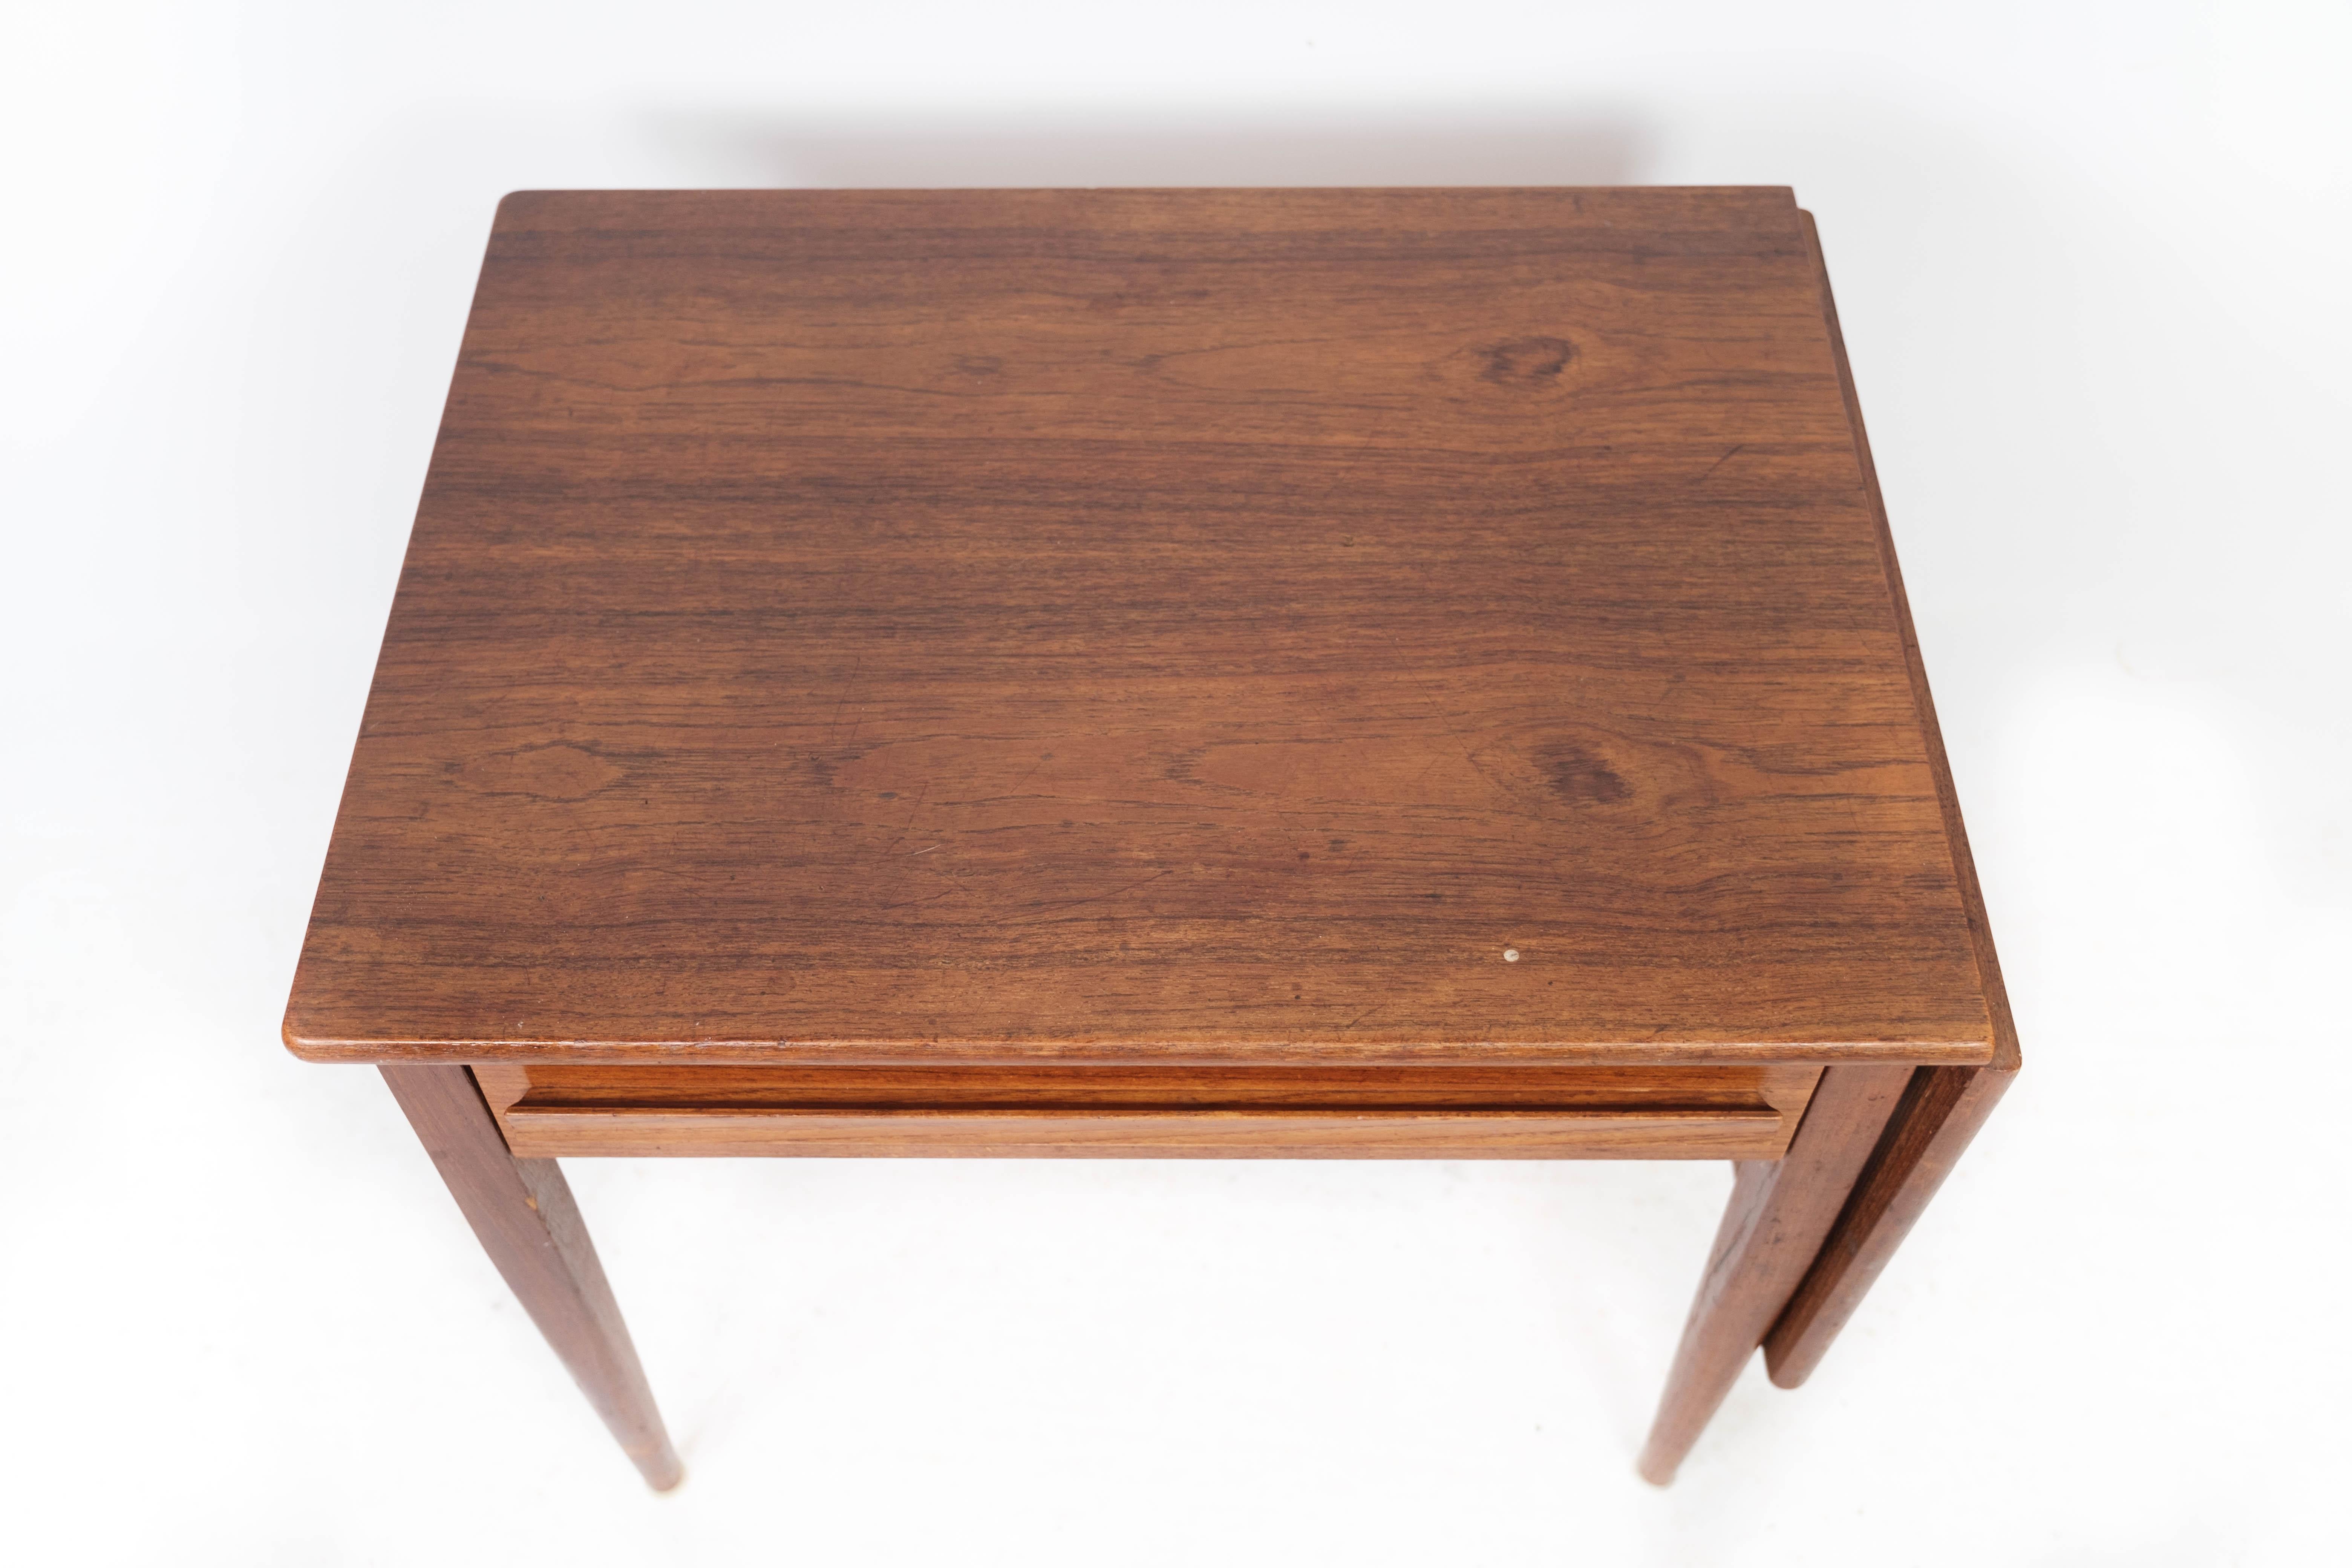 Mid-20th Century Side Table Made In Teak, Danish Design Made By Silkeborg Furniture From 1960s For Sale